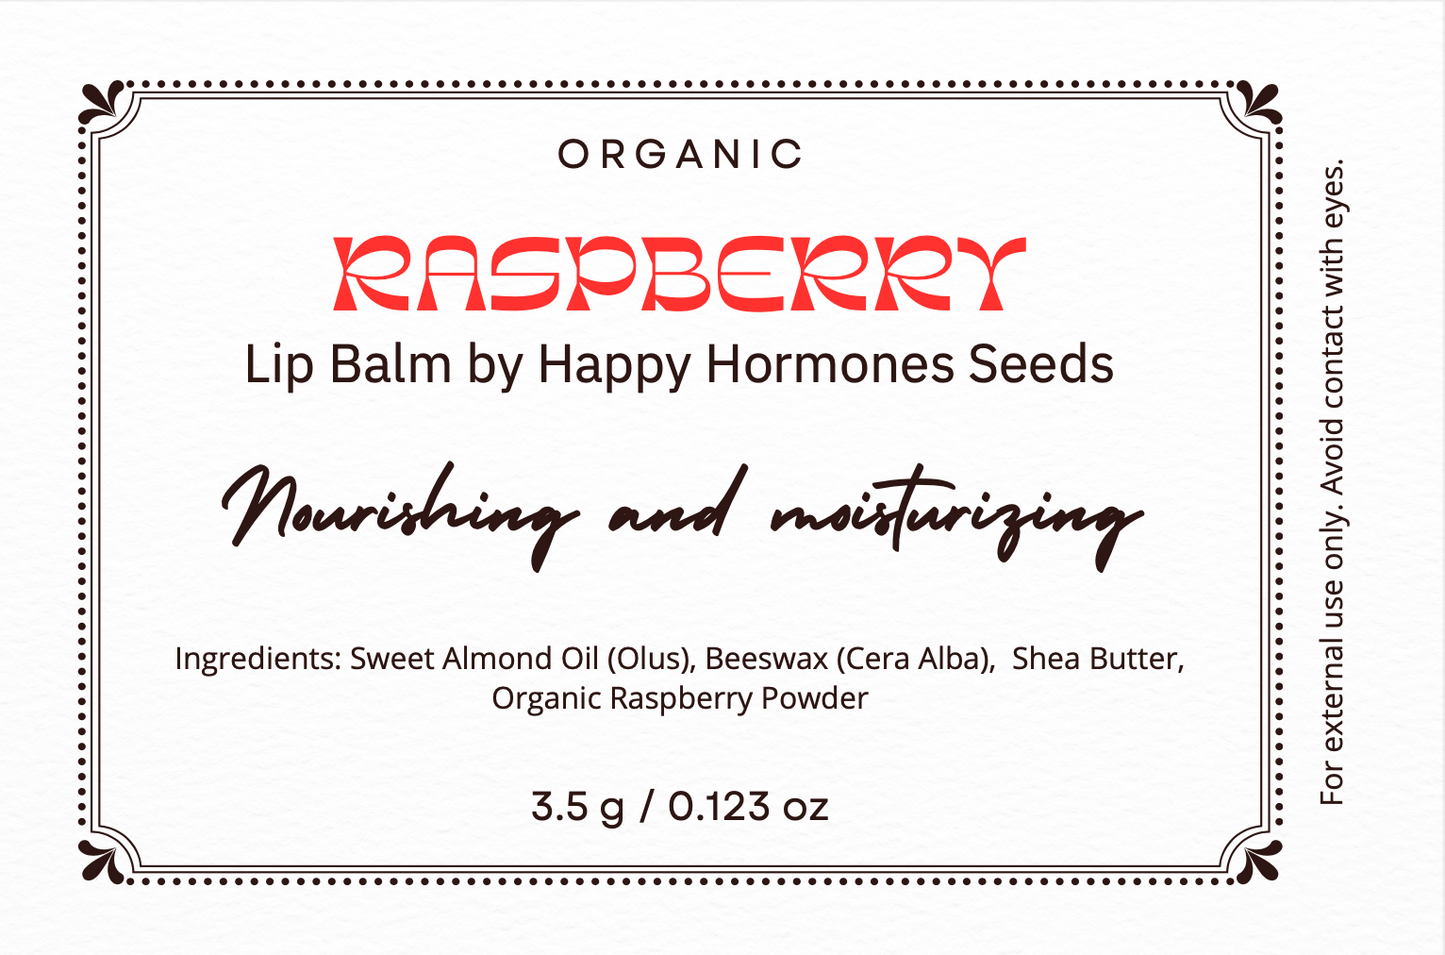 100% natural, organic raspberry tinted lip balm by Happy Hormones Seeds